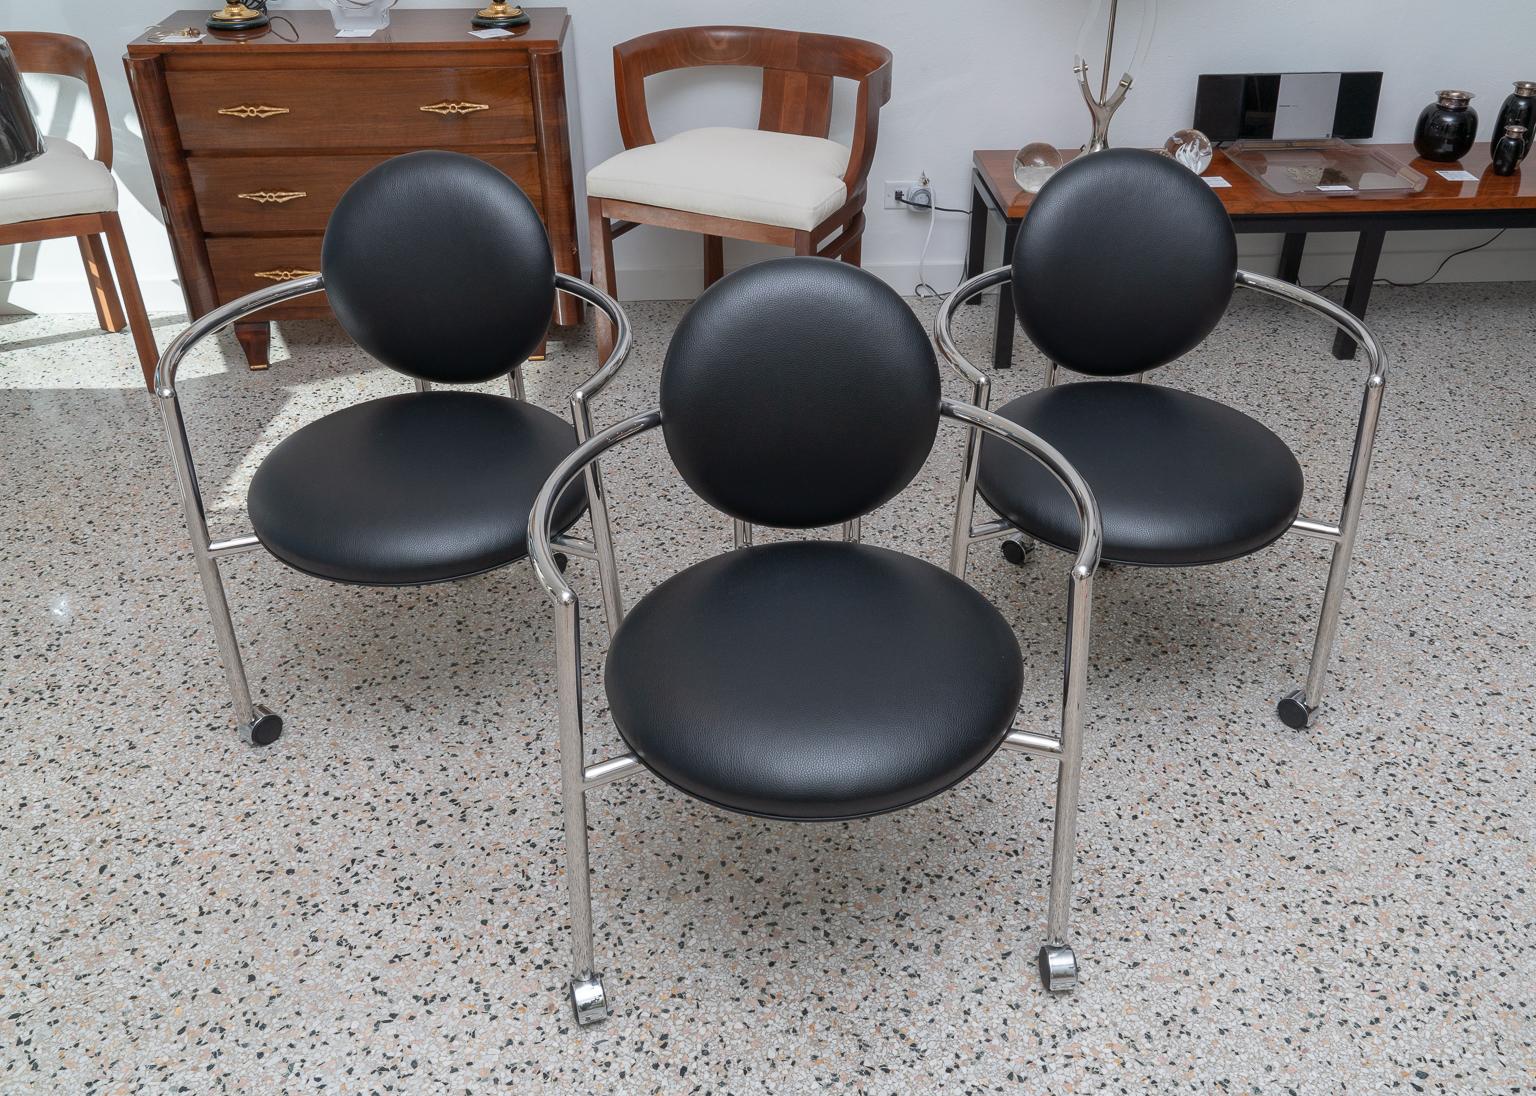  Black Leather and Chrome Arm Chair 1